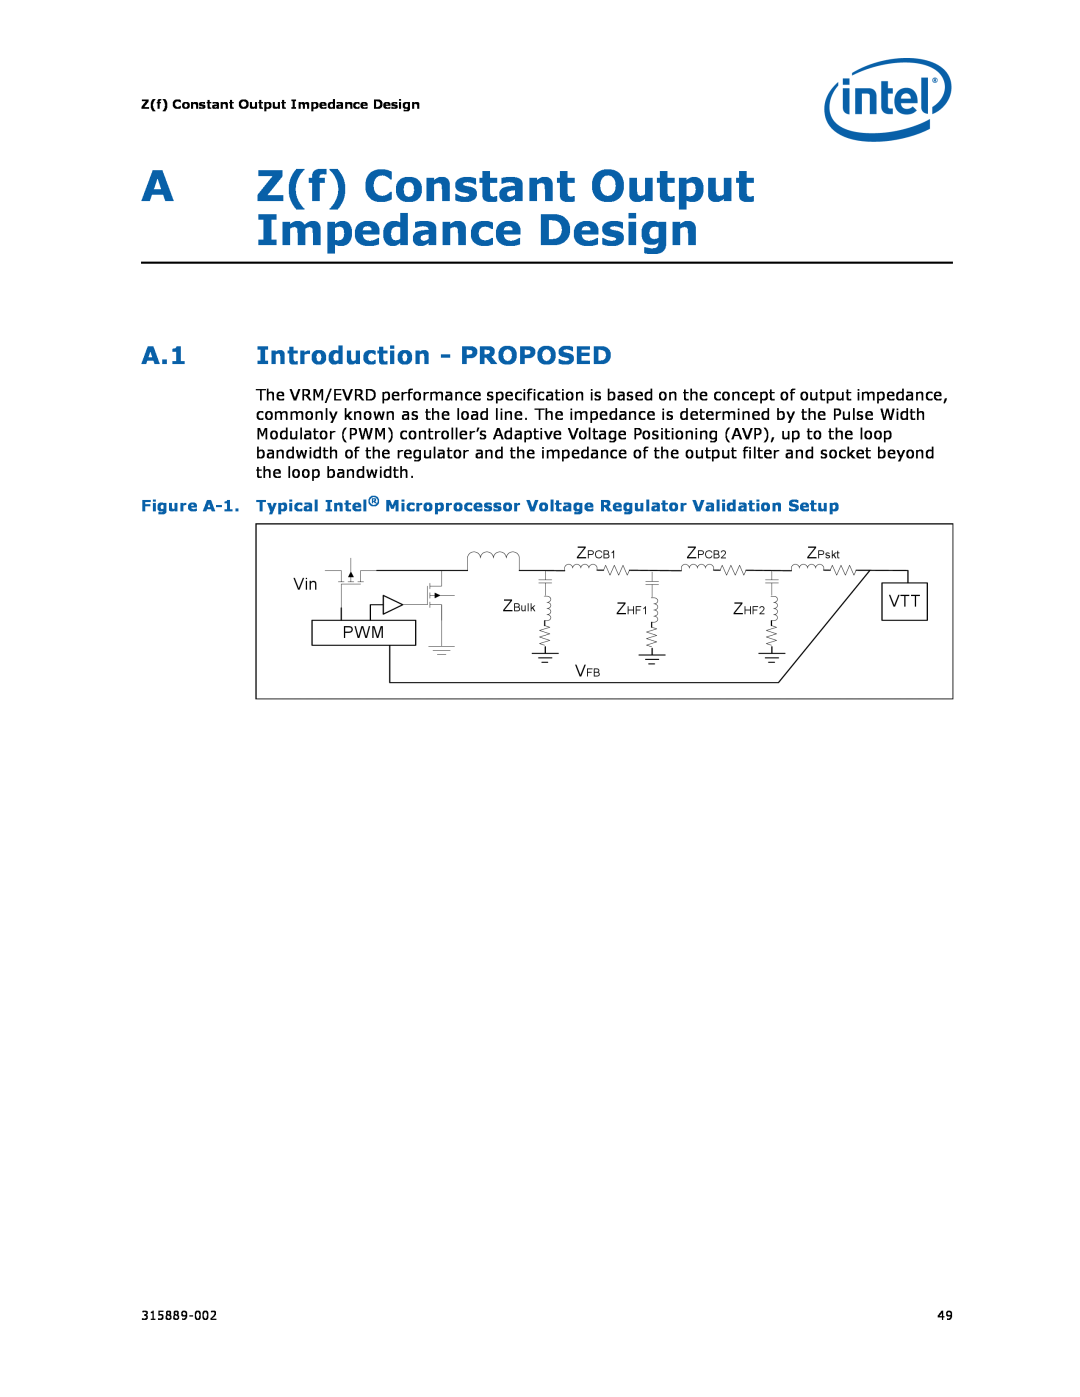 Intel 315889-002 manual A.1 Introduction - PROPOSED, AZf Constant Output Impedance Design 